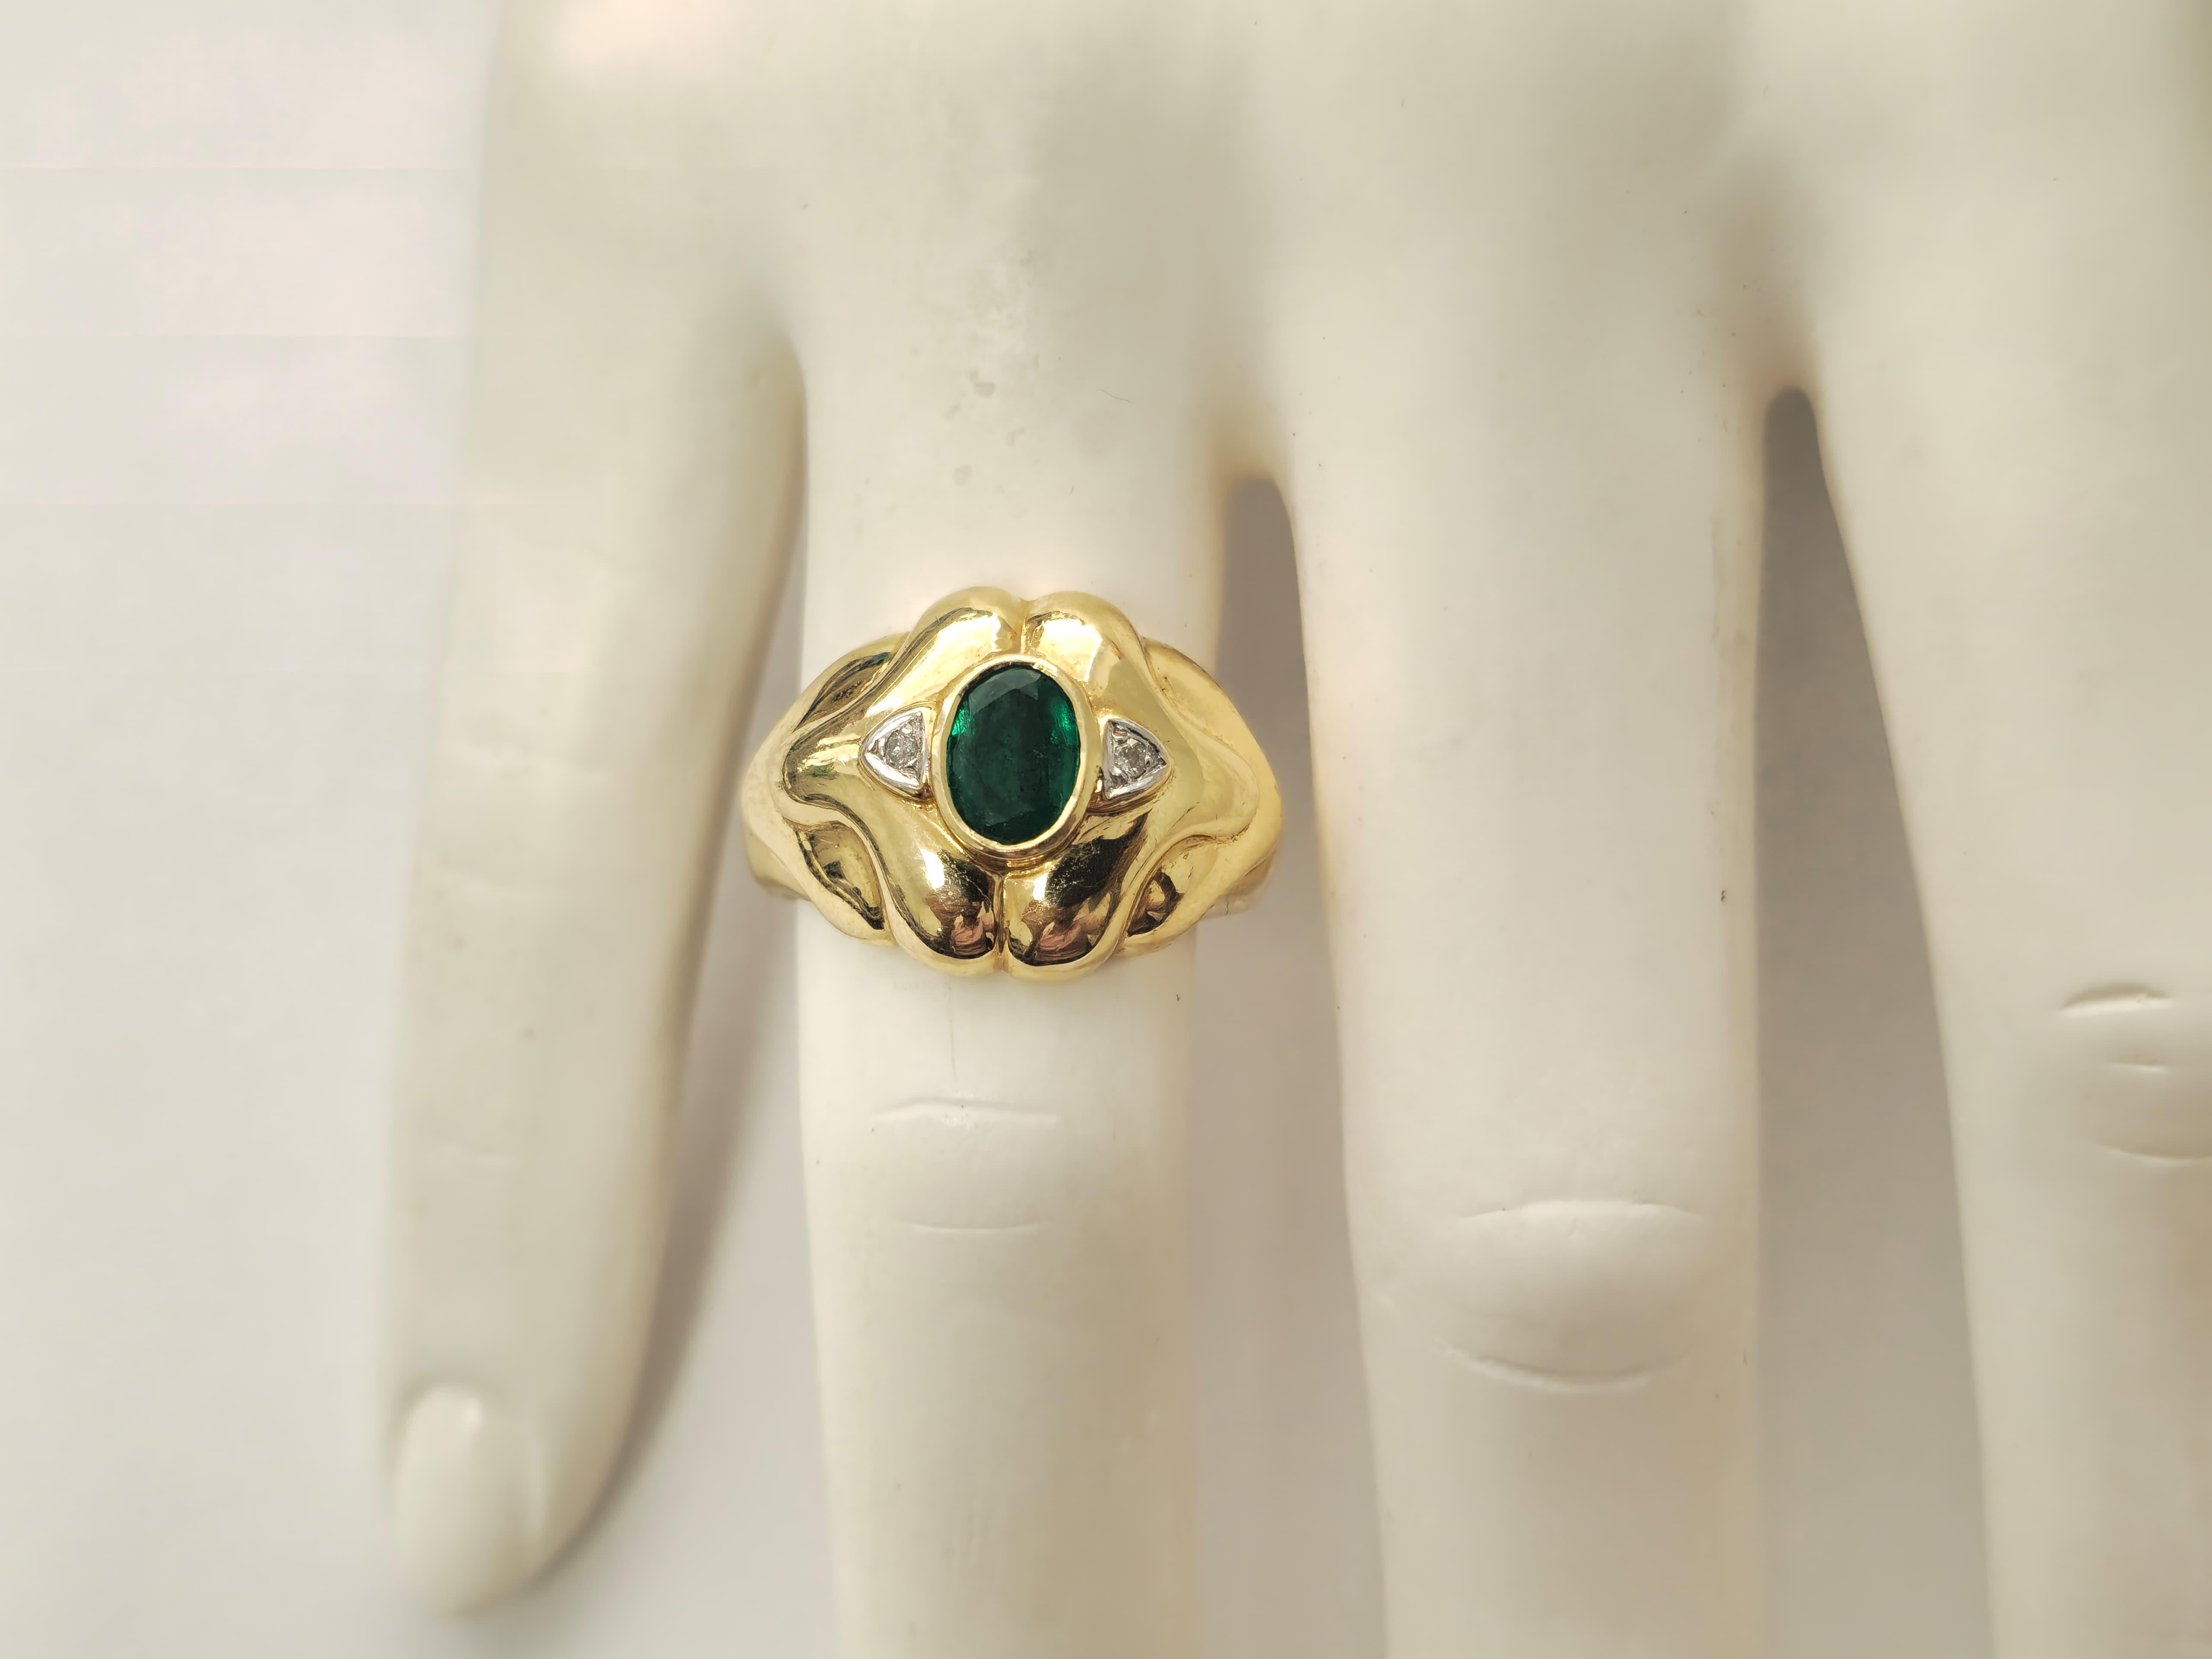 Vintage Zambian Emerald Ring in 14K Yellow Gold In Excellent Condition For Sale In Miami, FL